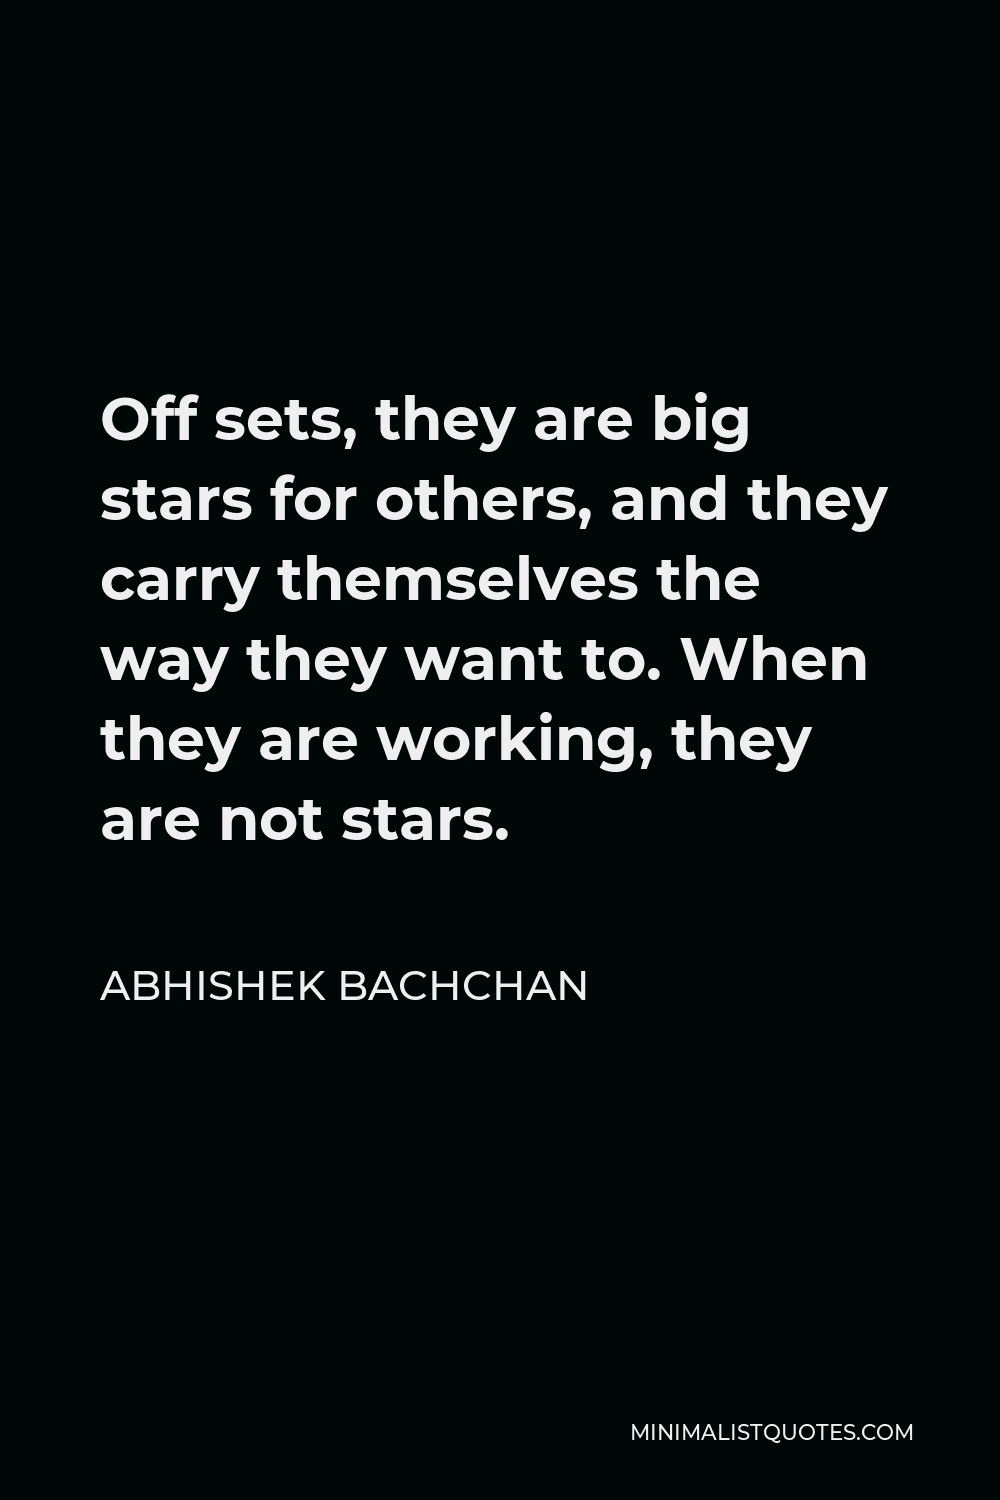 Abhishek Bachchan Quote - Off sets, they are big stars for others, and they carry themselves the way they want to. When they are working, they are not stars.